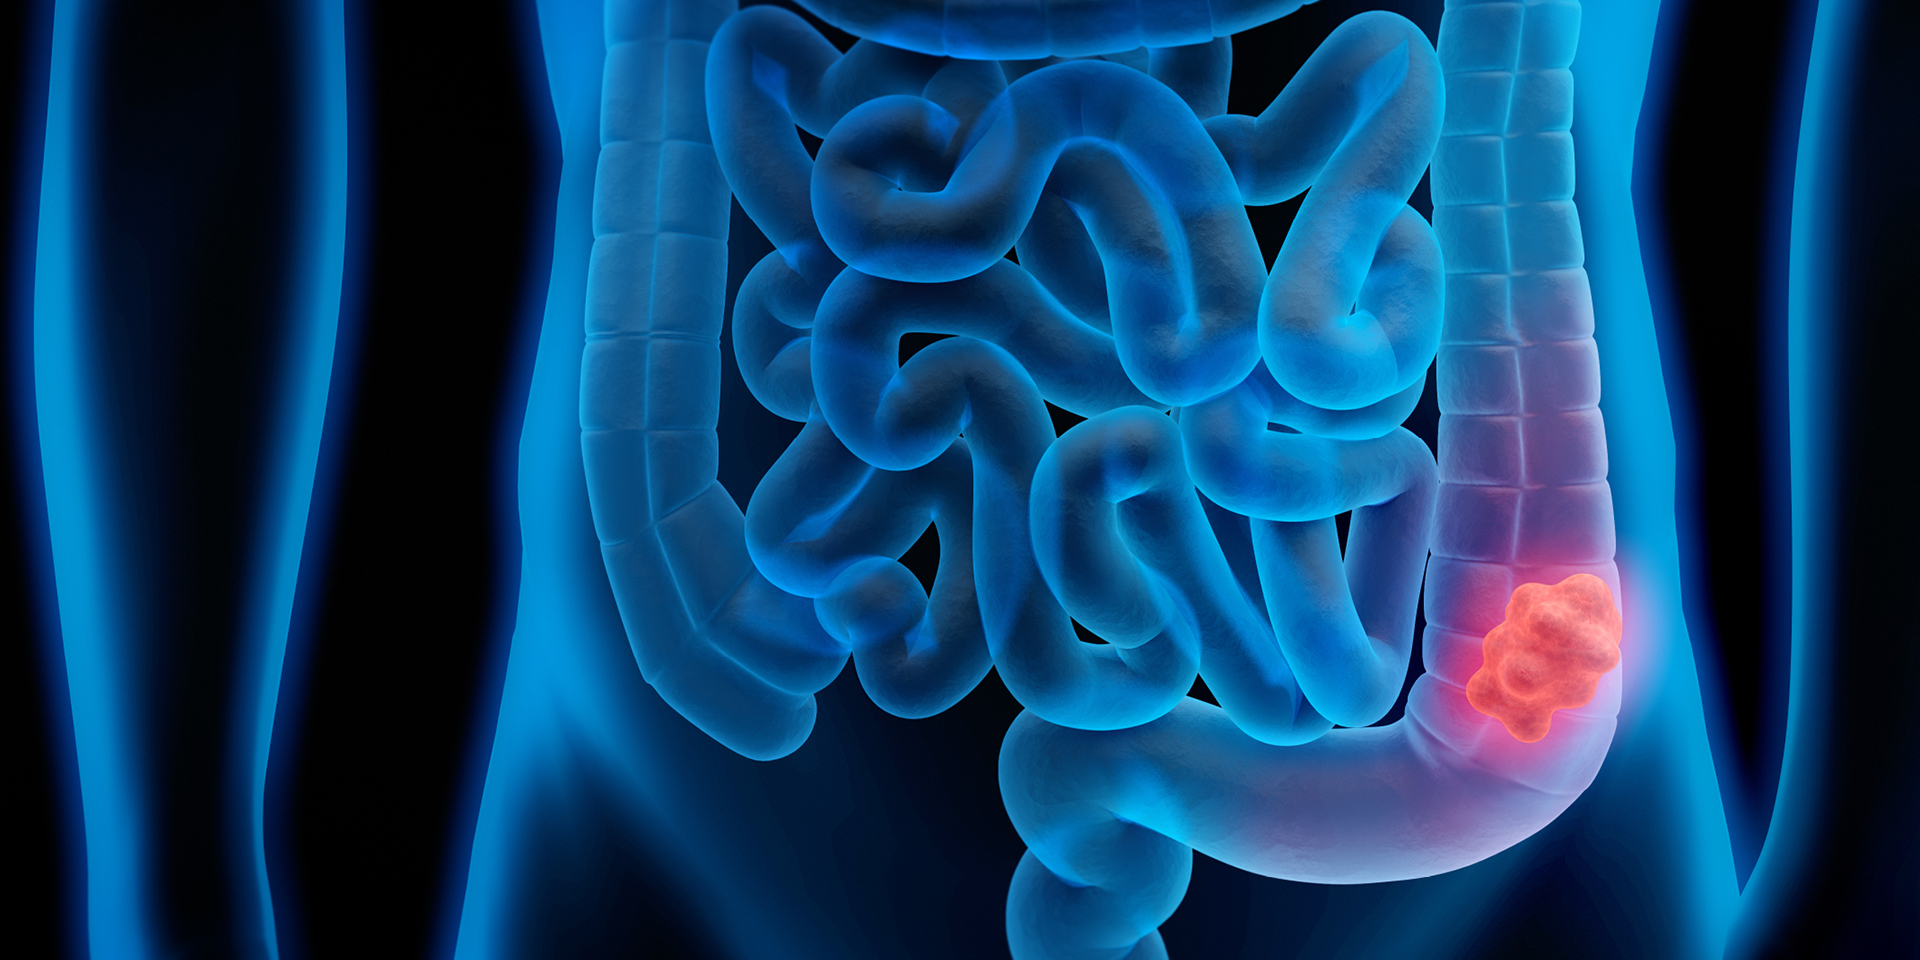 vector image of intestines inside a body